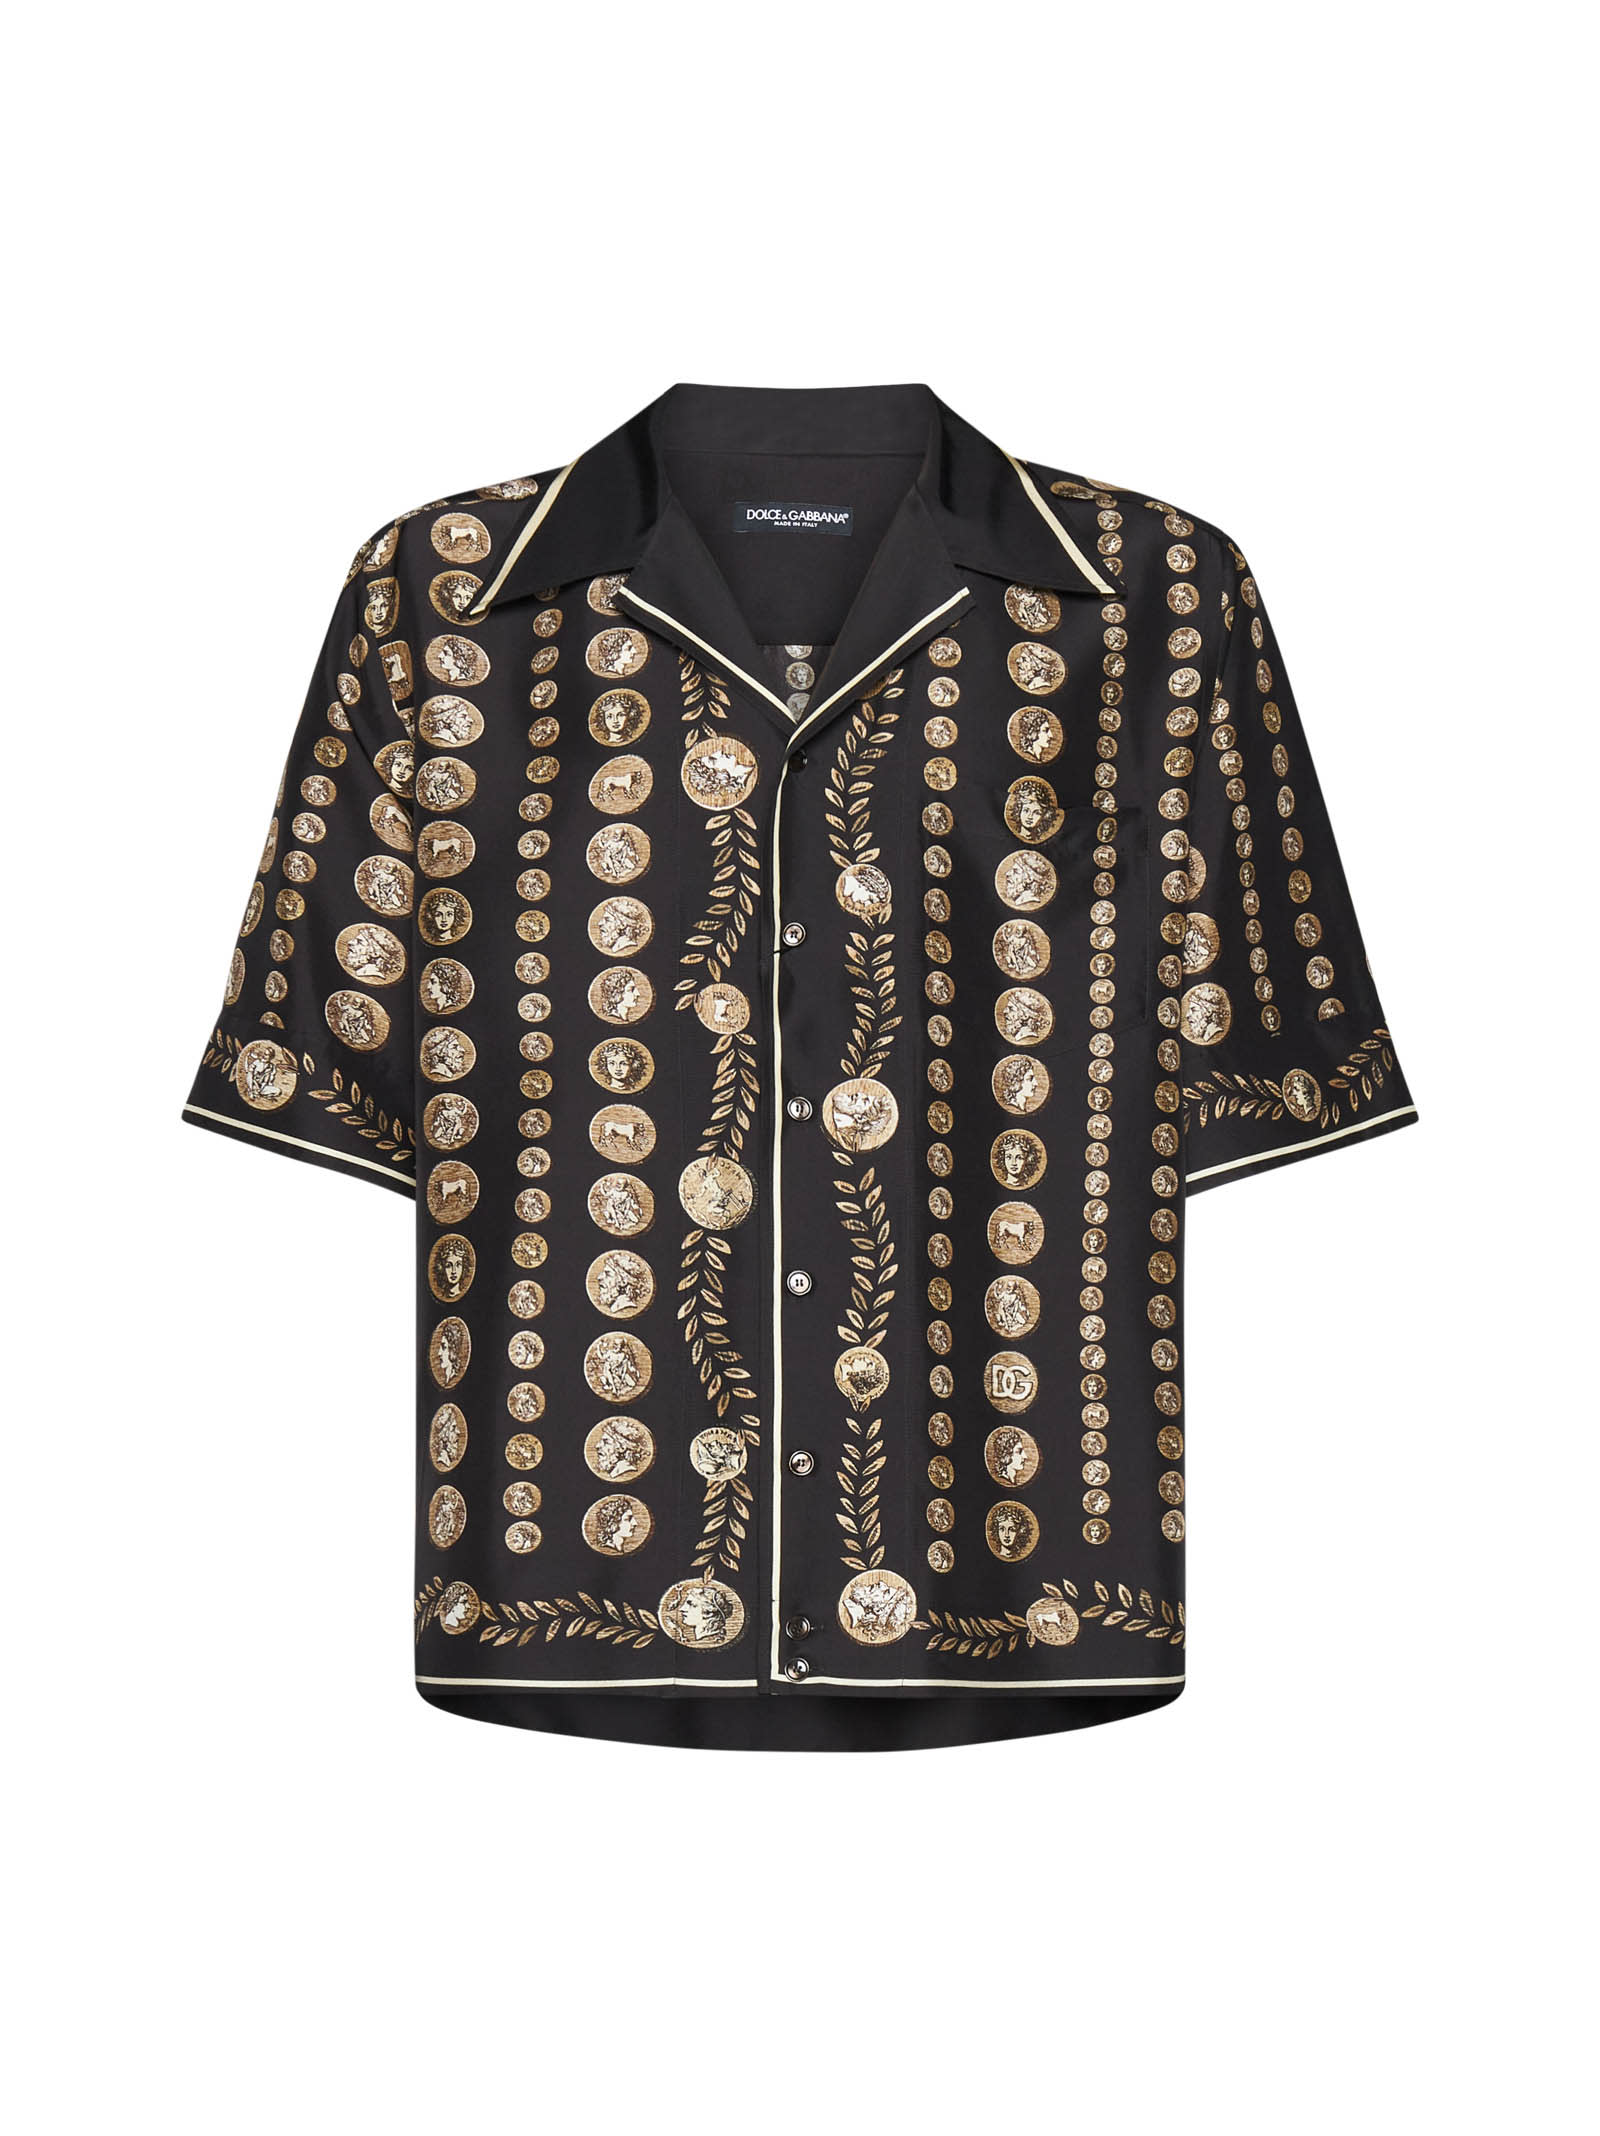 DOLCE & GABBANA BLACK BOWLING SHIRT WITH ALL-OVER COIN PRINT IN SILK MAN